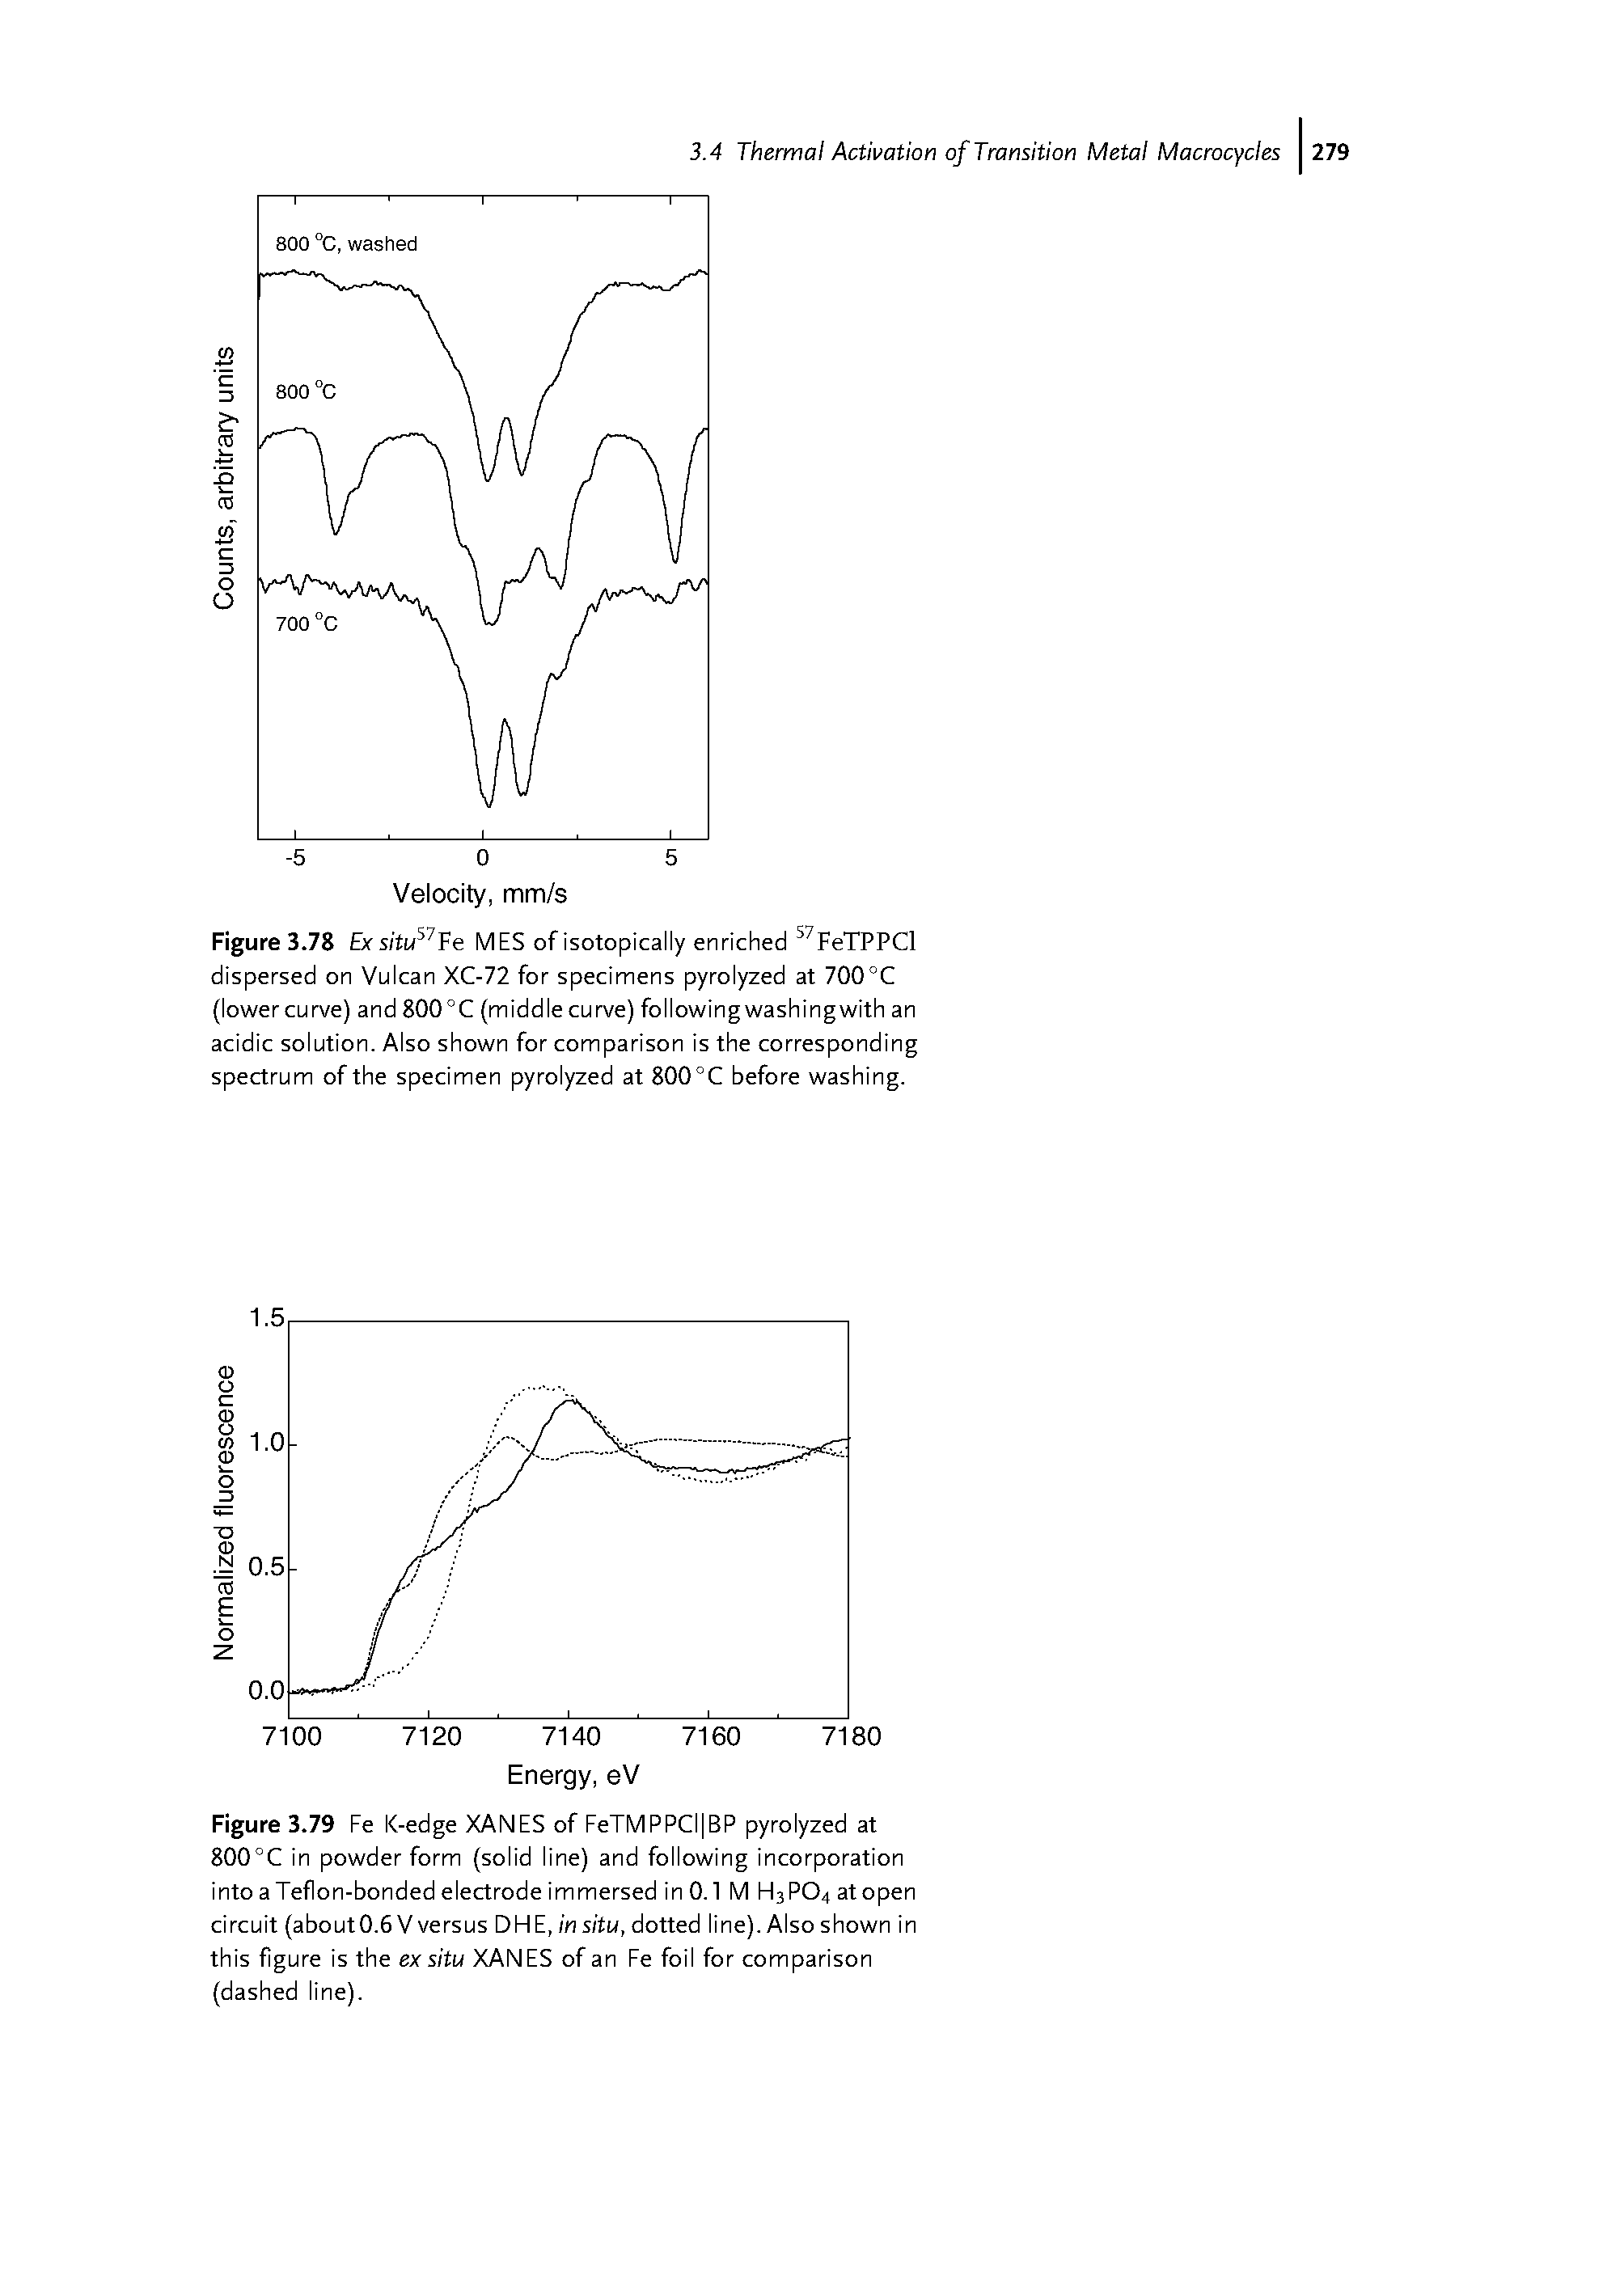 Figure 3.79 Fe K-edge XANES of FeTMPPCl BP pyrolyzed at 800°C in powder form (solid line) and following incorporation into a Teflon-bonded electrode immersed in 0.1 M H3PO4 at open circuit (about 0.6 V versus DHE, in situ, dotted line). Also shown in this figure is the ex situ XANES of an Fe foil for comparison (dashed line).